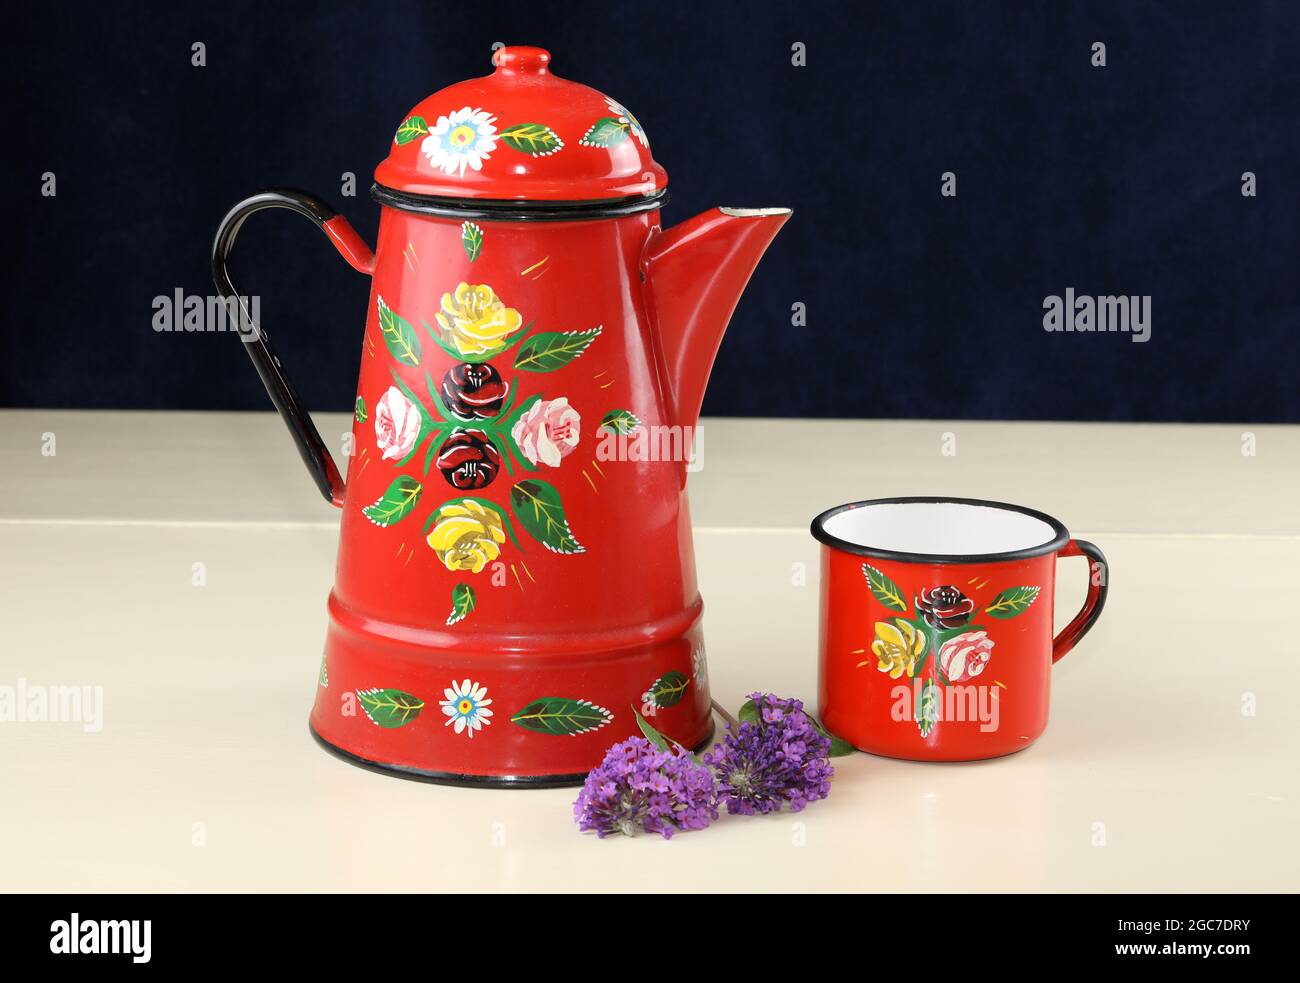 An Image Of A Red Enamel Coffee Pot Painted With Roses Stock Photo